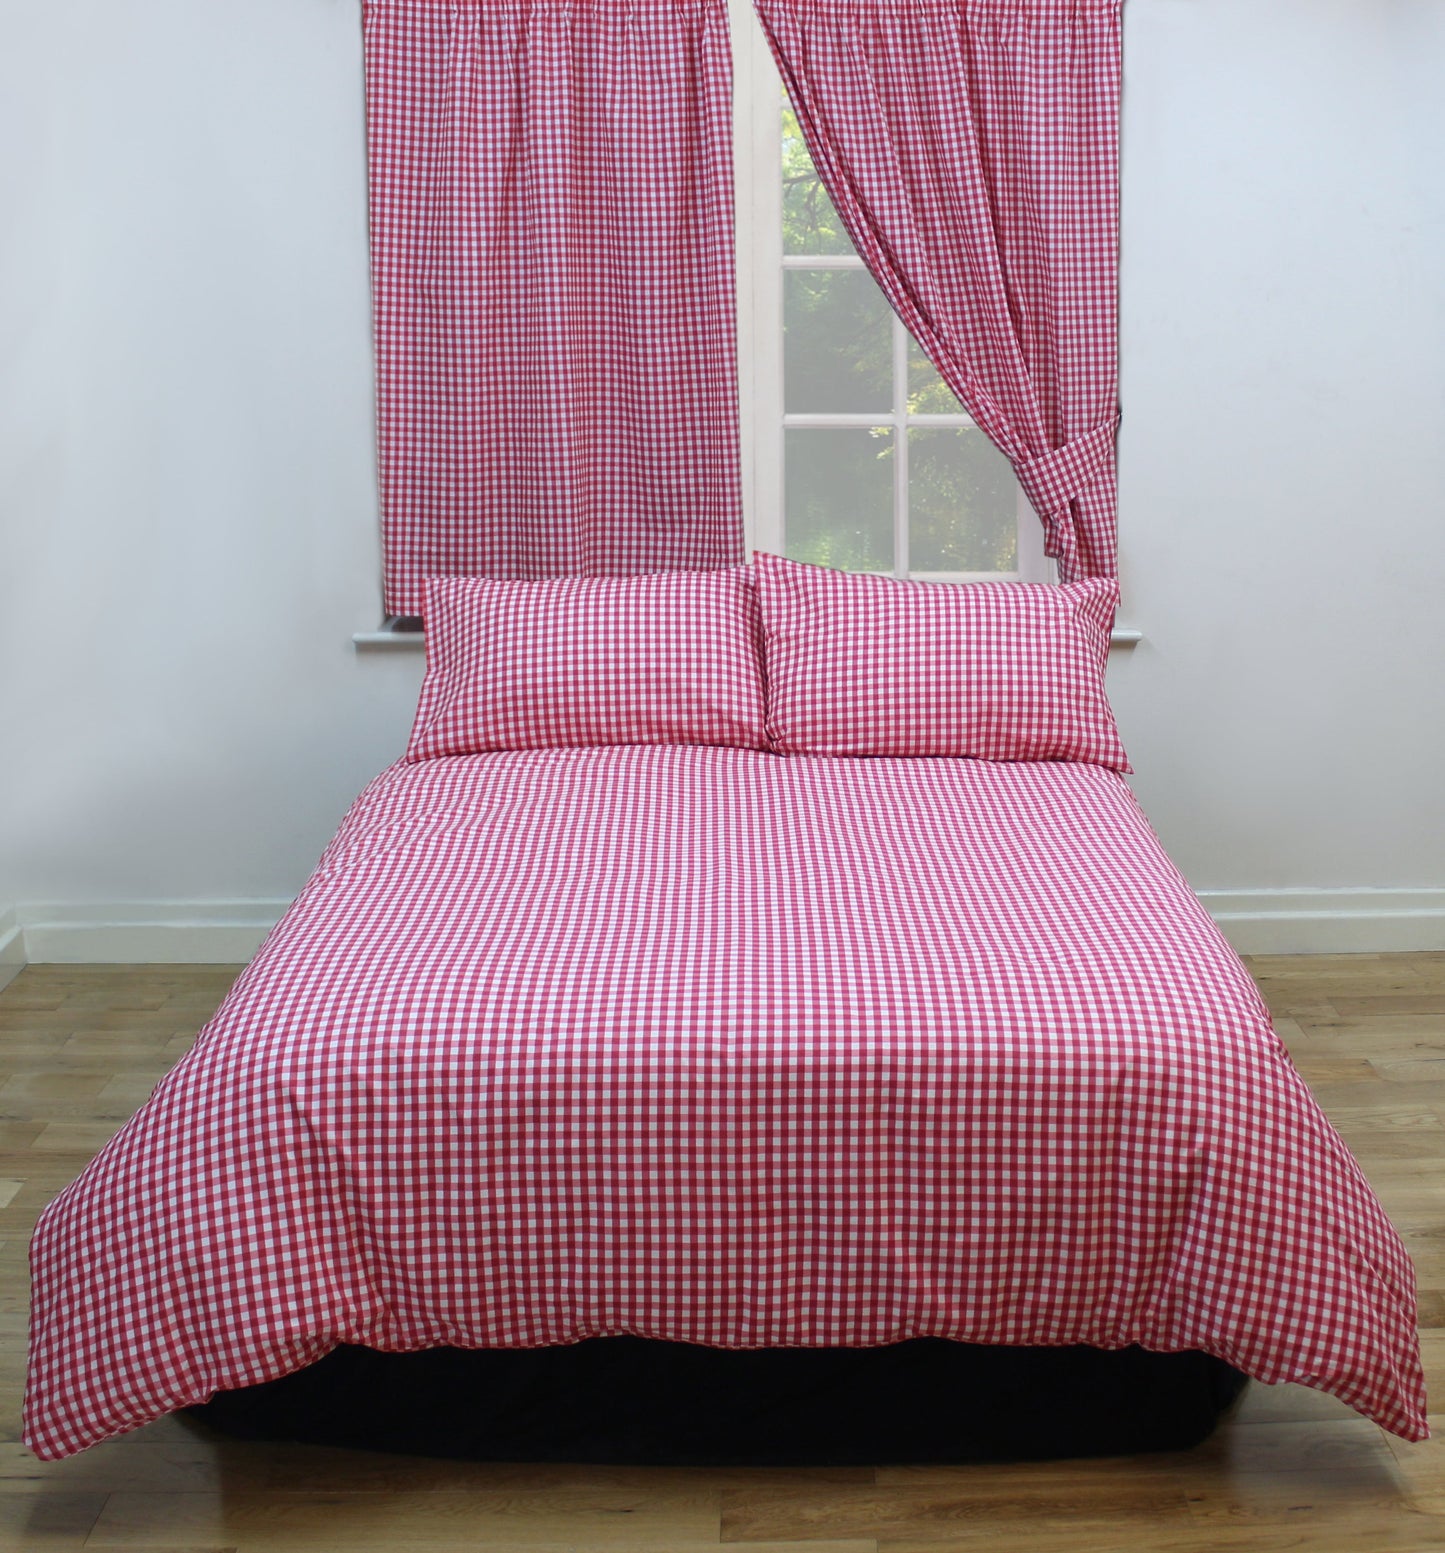 Double Bed Gingham Check Red Cherry White Duvet Cover Set 100% Natural Cotton